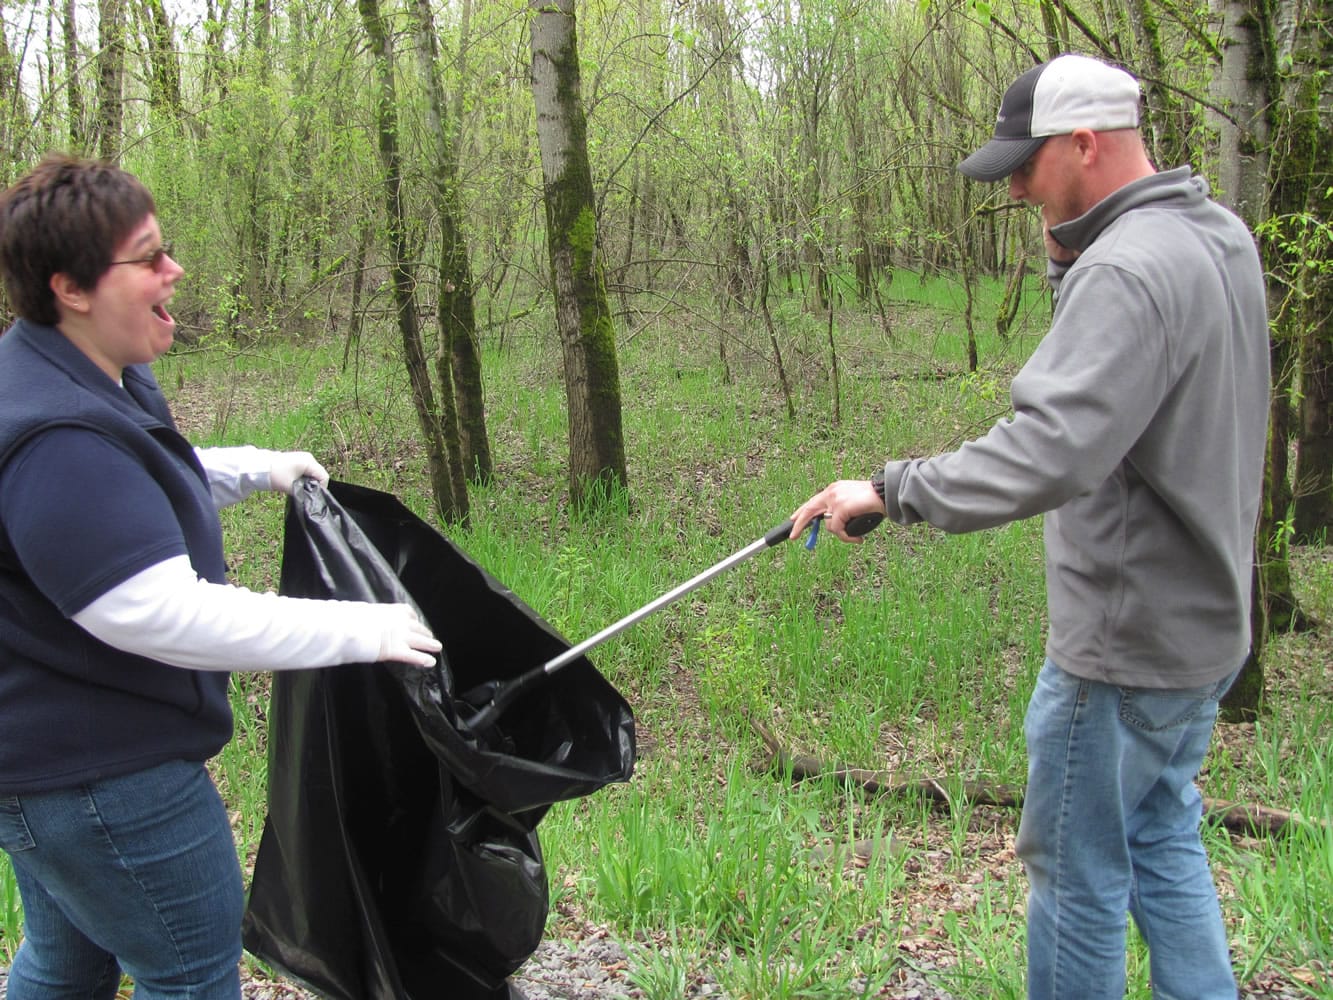 Debra Itzen and Jeramy Wilcox, Port of Camas-Washougal employees, participate in the Earth Day cleanup at Capt.